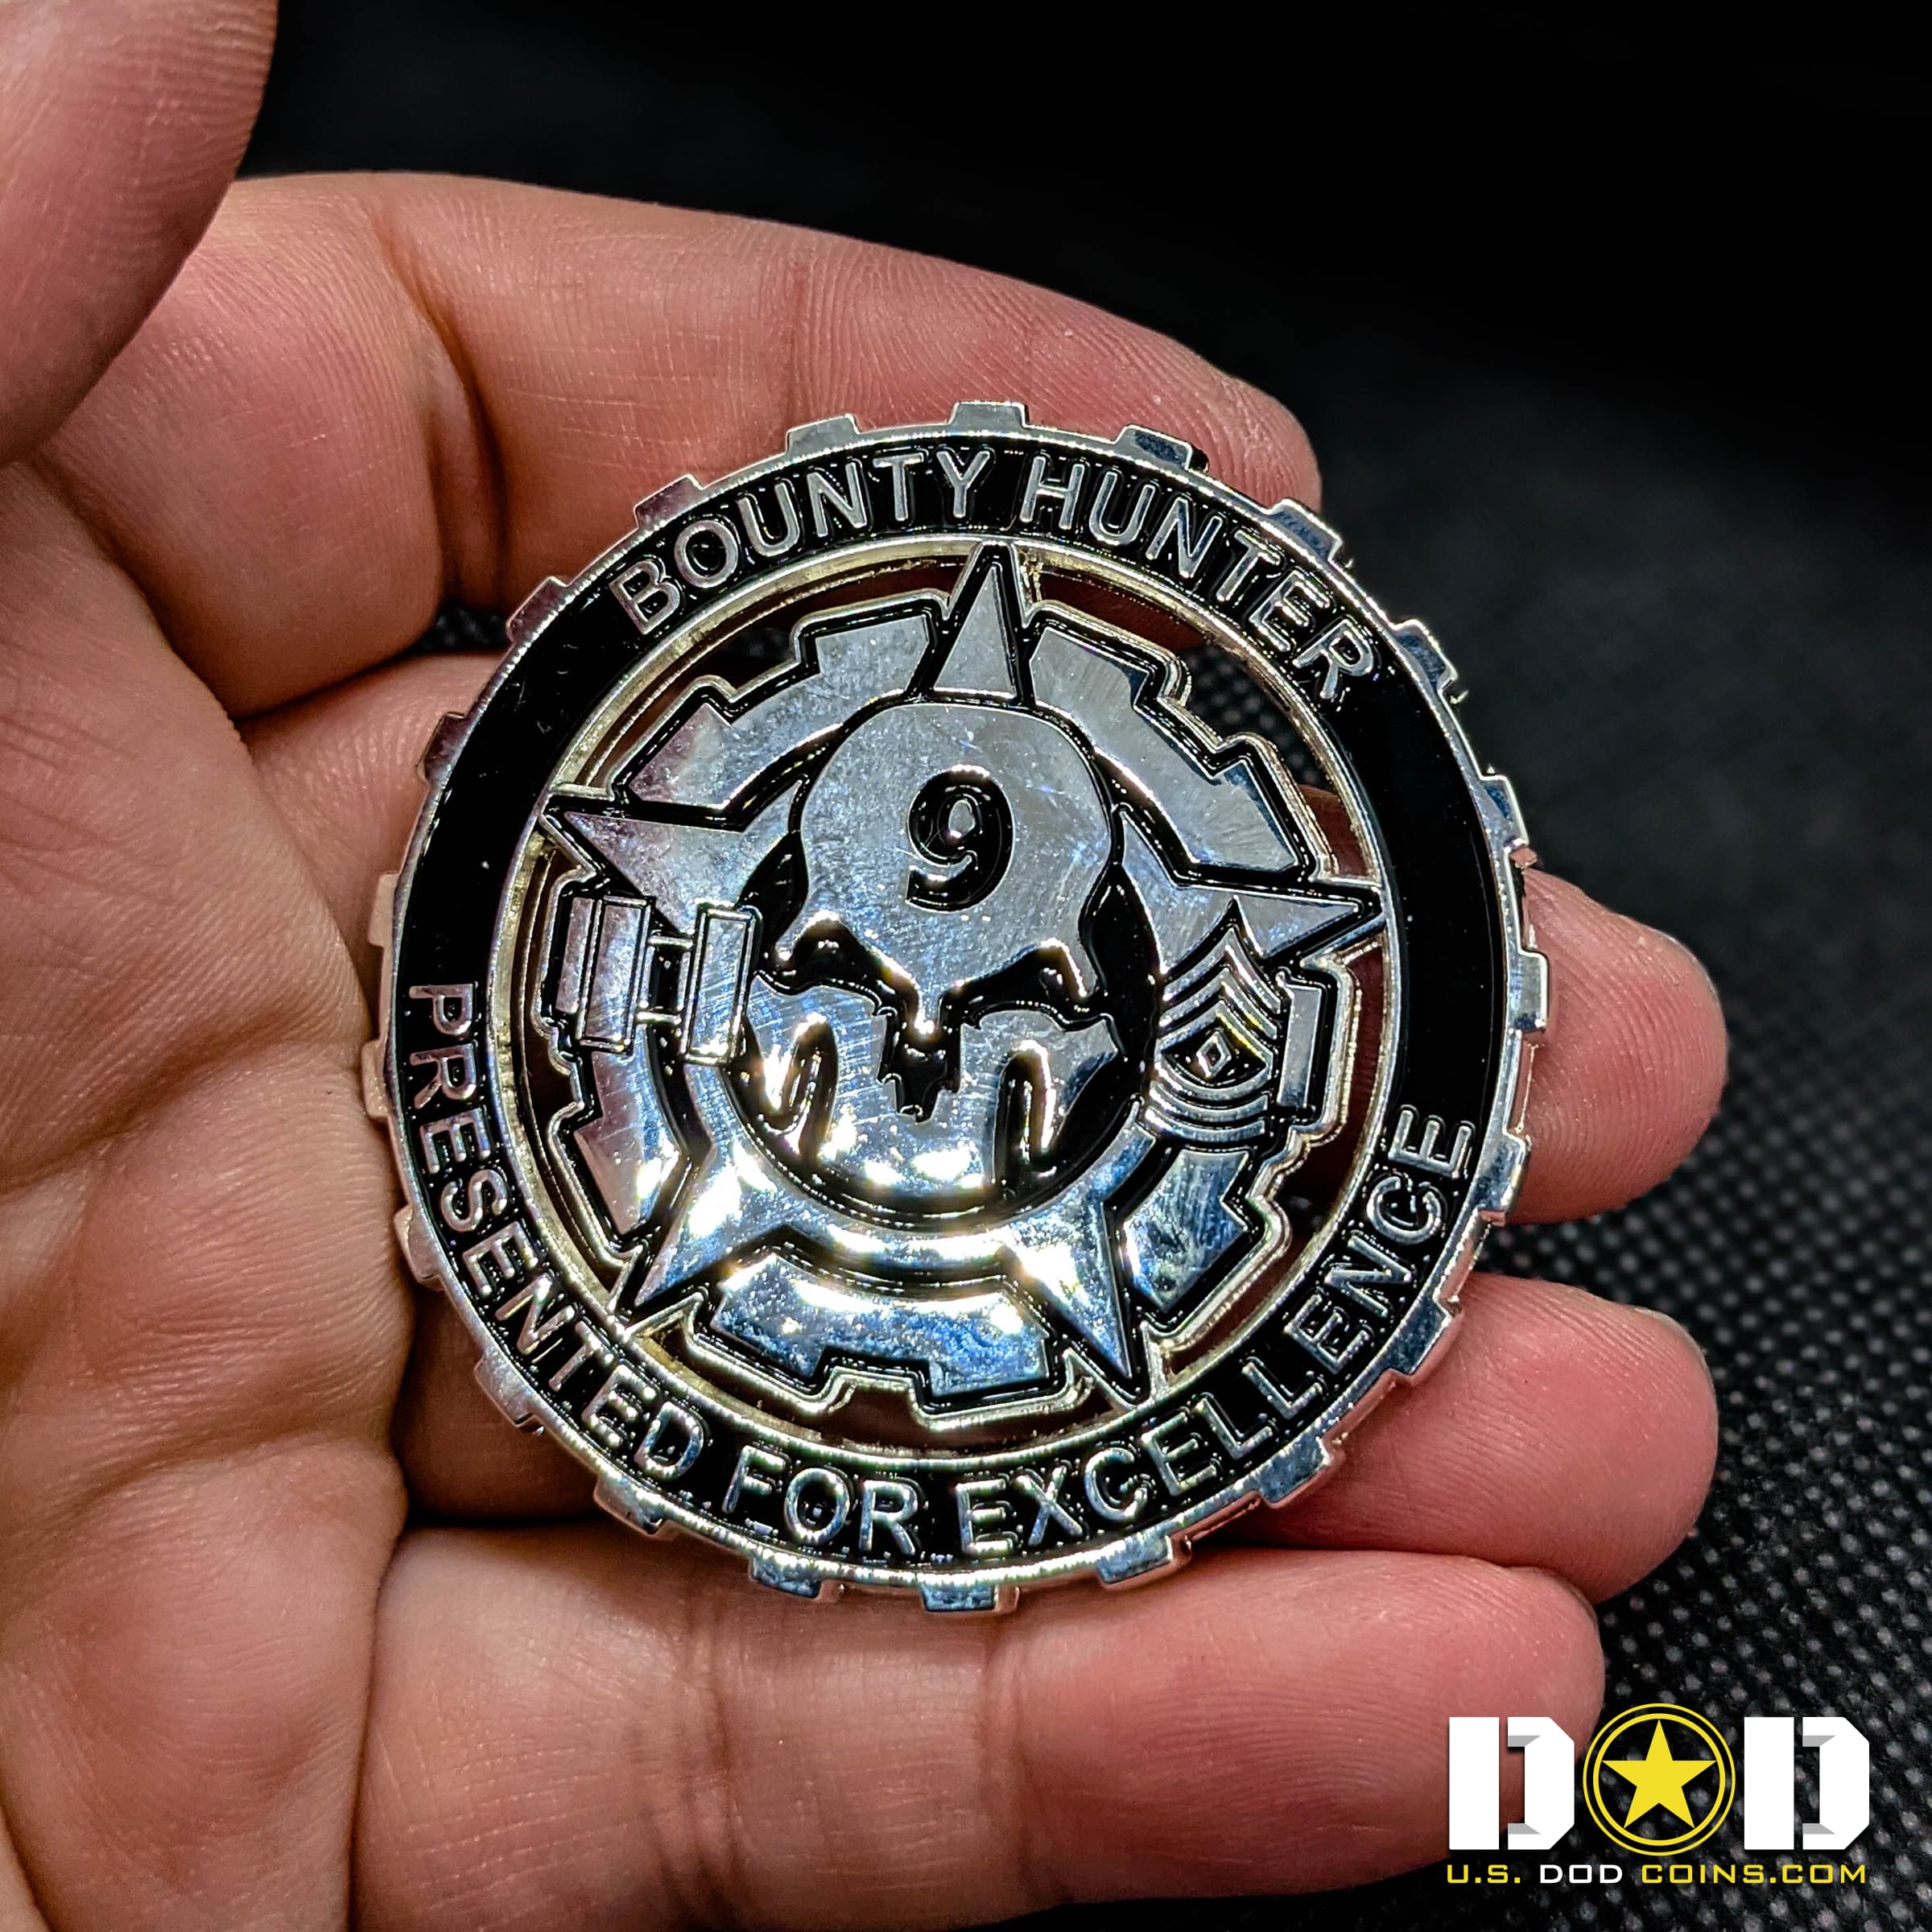 9th-CBRN-CO-Bounty-Huntyers-Challenge-Coin_0003_USDODCoins-Challenge-Coins-Examples-45